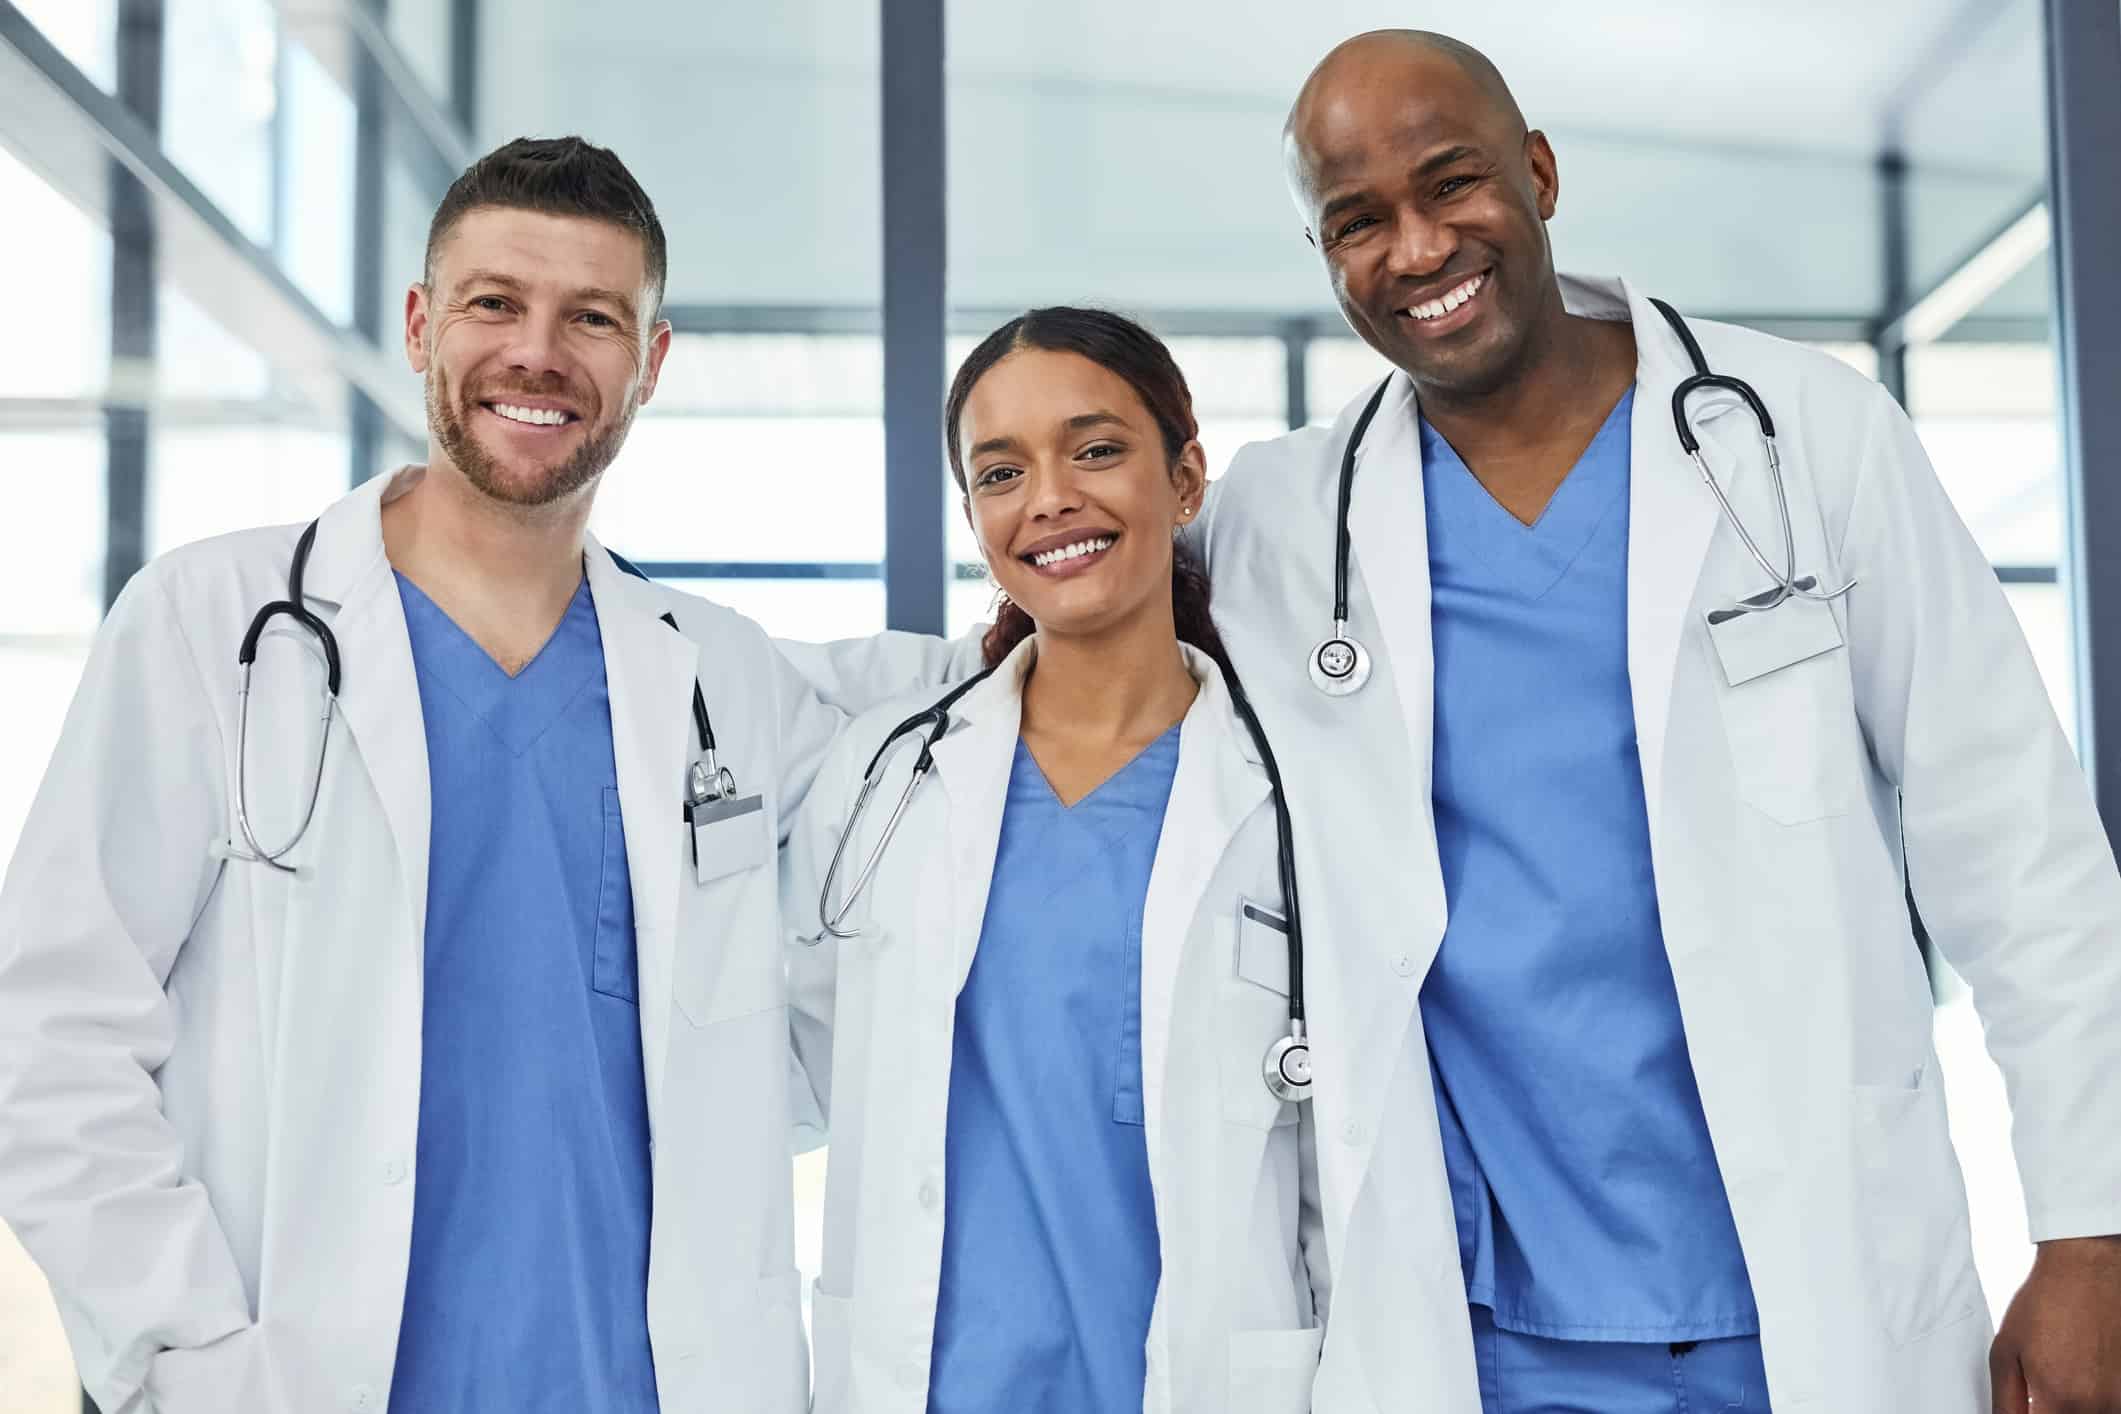 Diversity in Medicine: An Innovative Approach to Resident Physician Recruitment